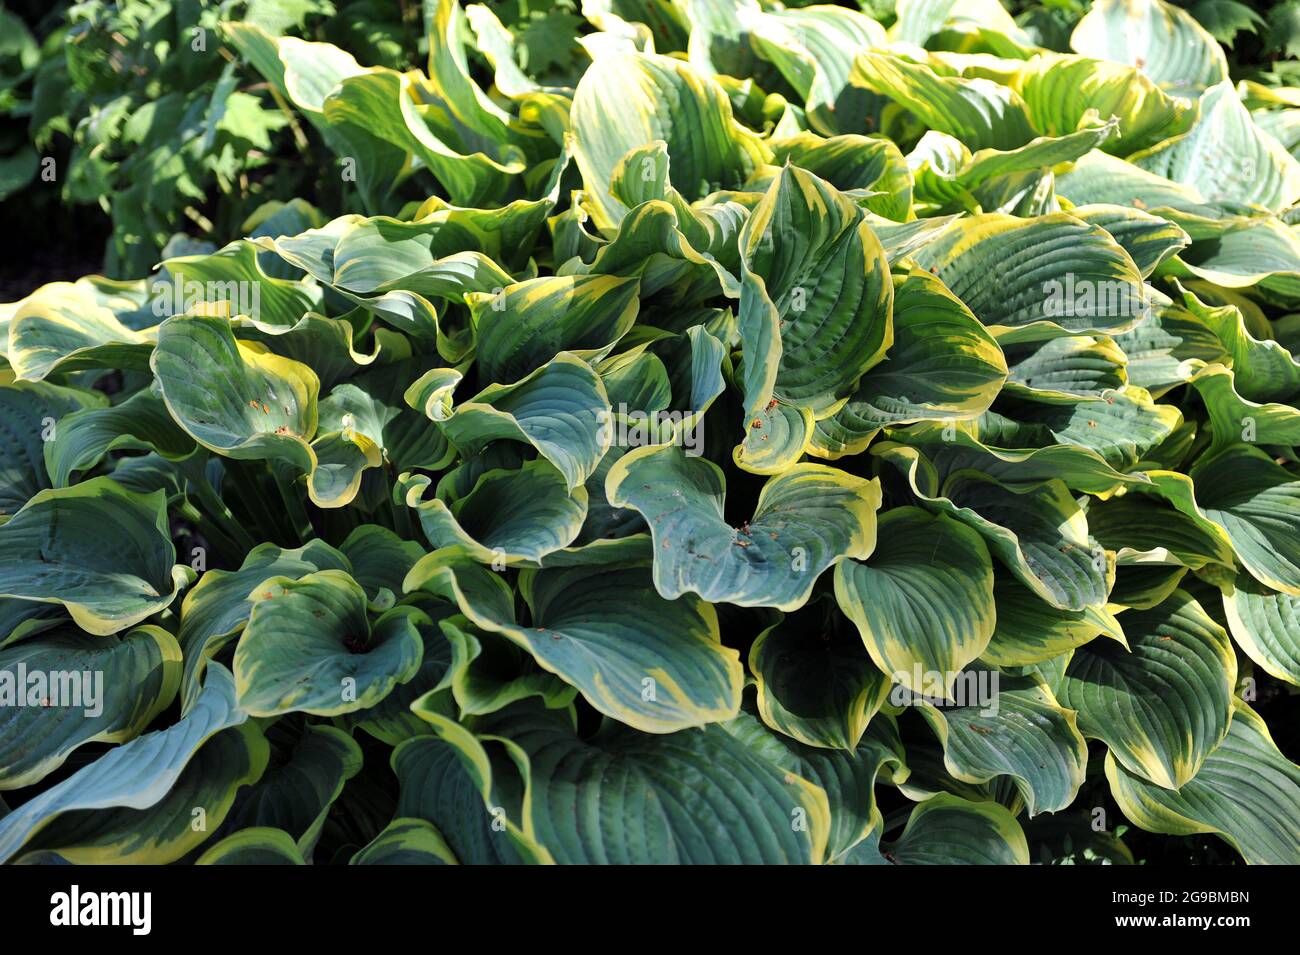 Giant Hosta Sagae with large variegated bluish-green leaves grows in a garden in May Stock Photo